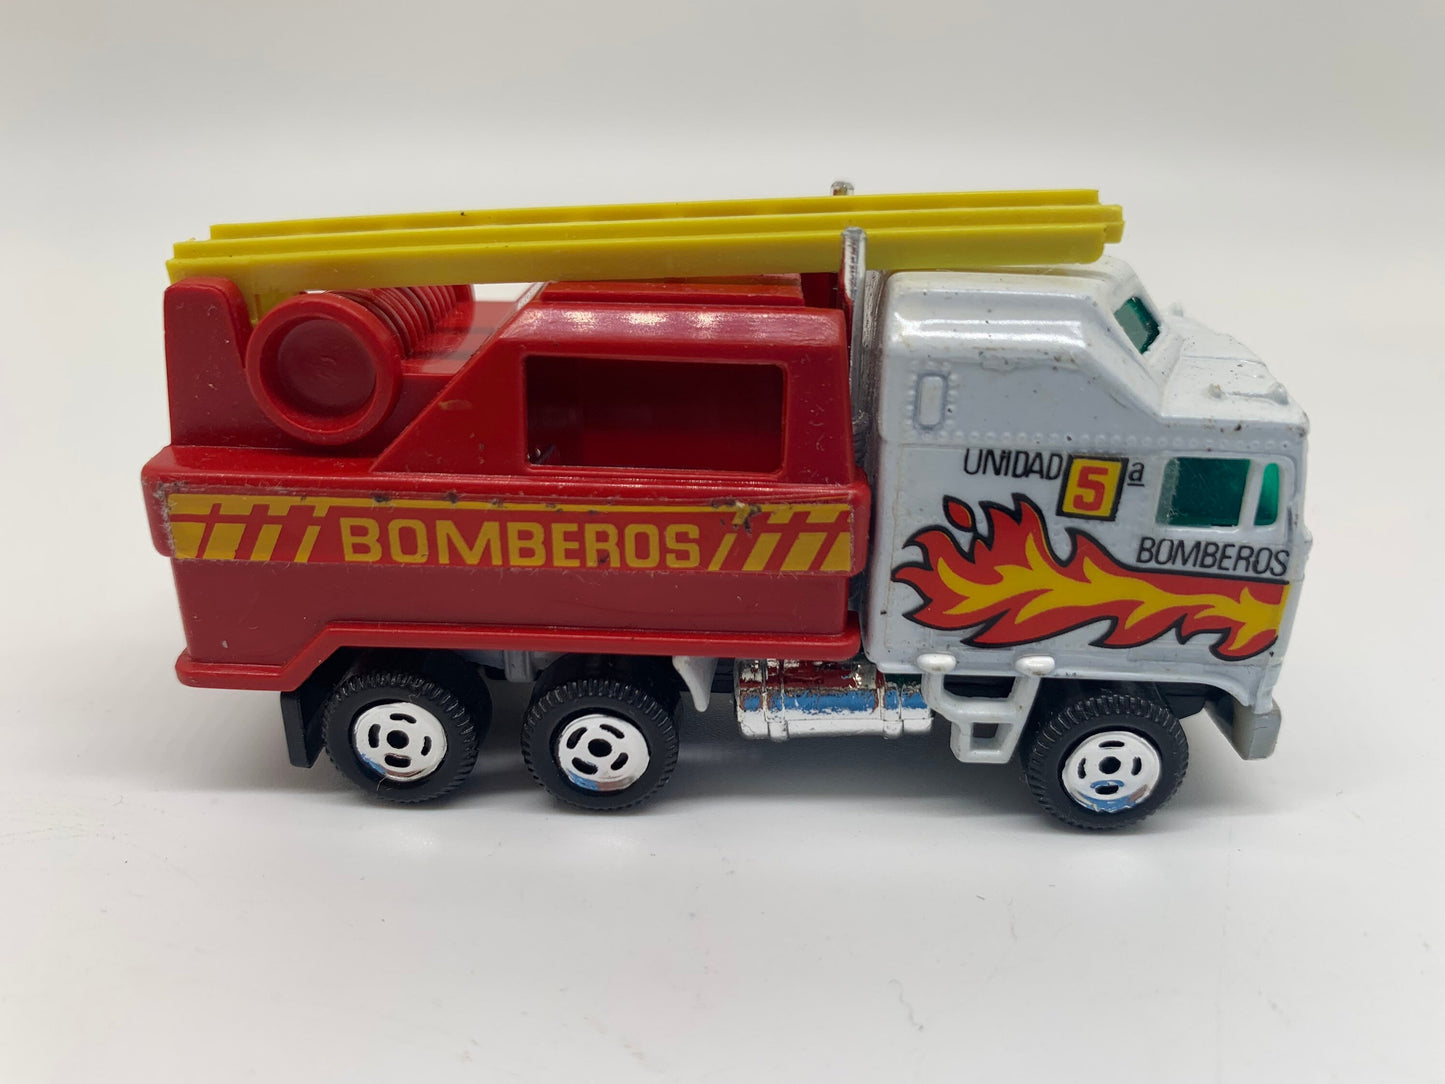 Guisval Bomberos Unidad 5 Fire Truck Red Miniature Collectible Scale Model Toy Car